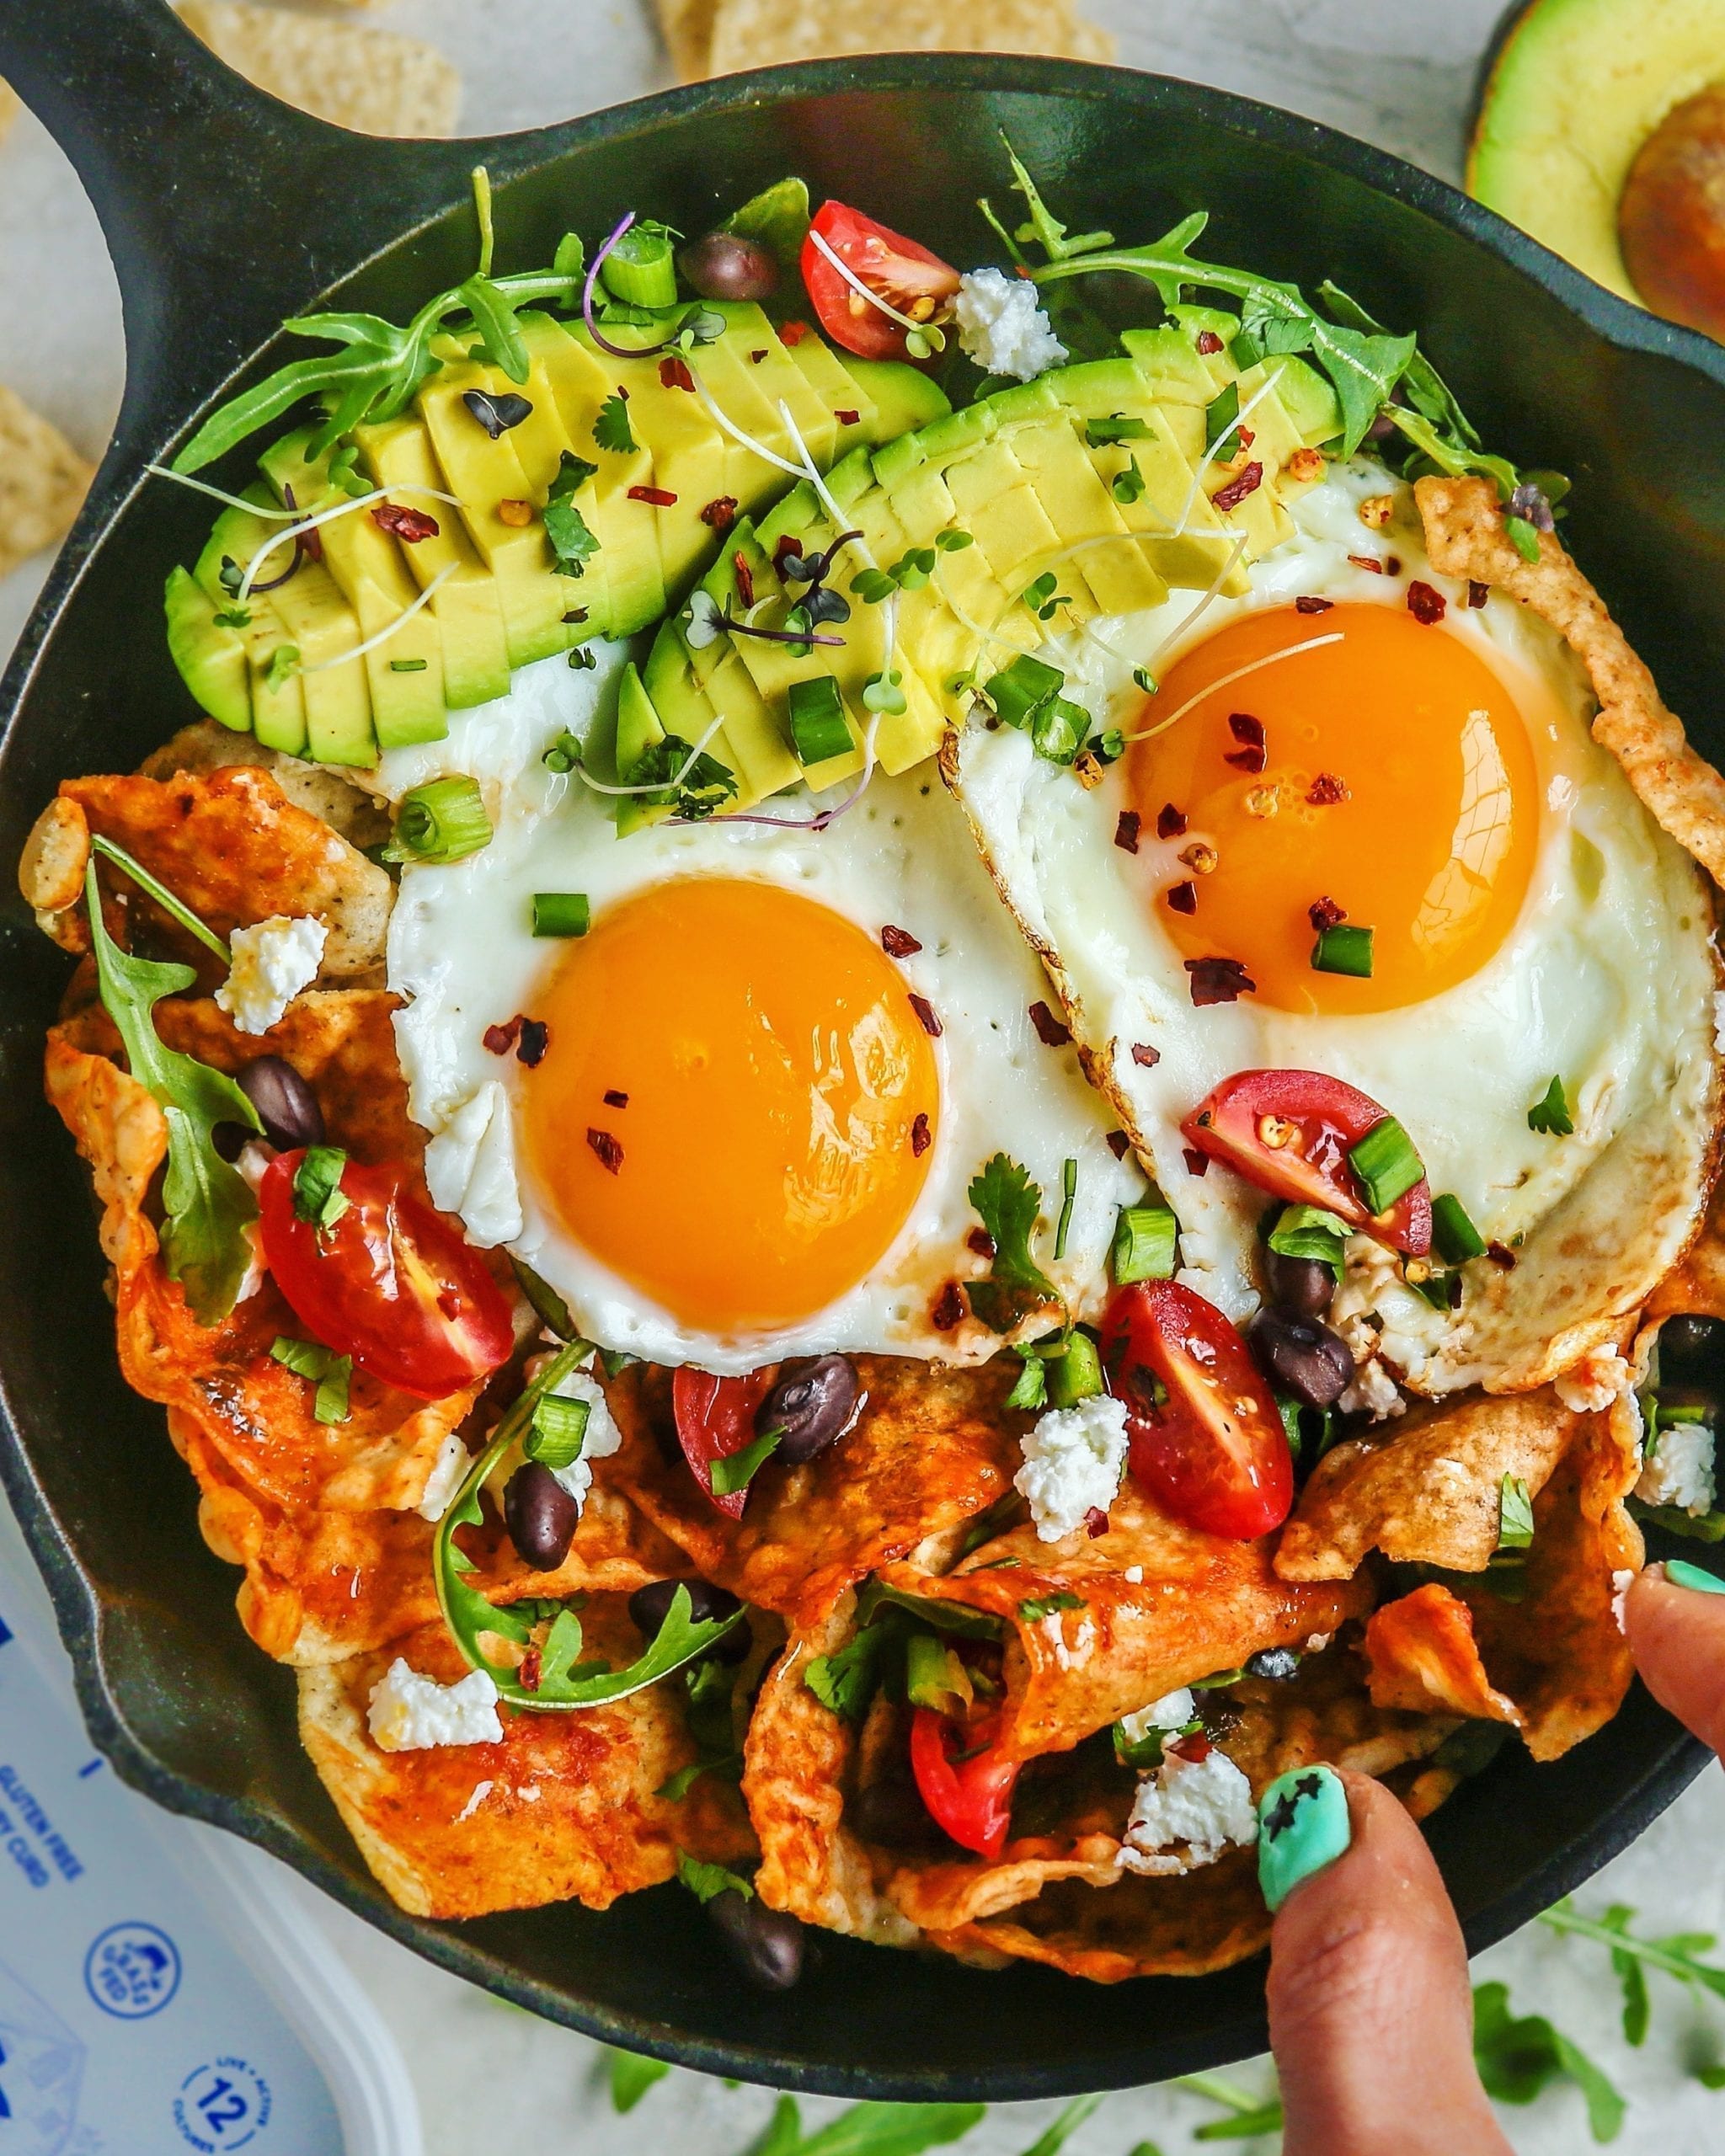 Chilaquiles with Eggs